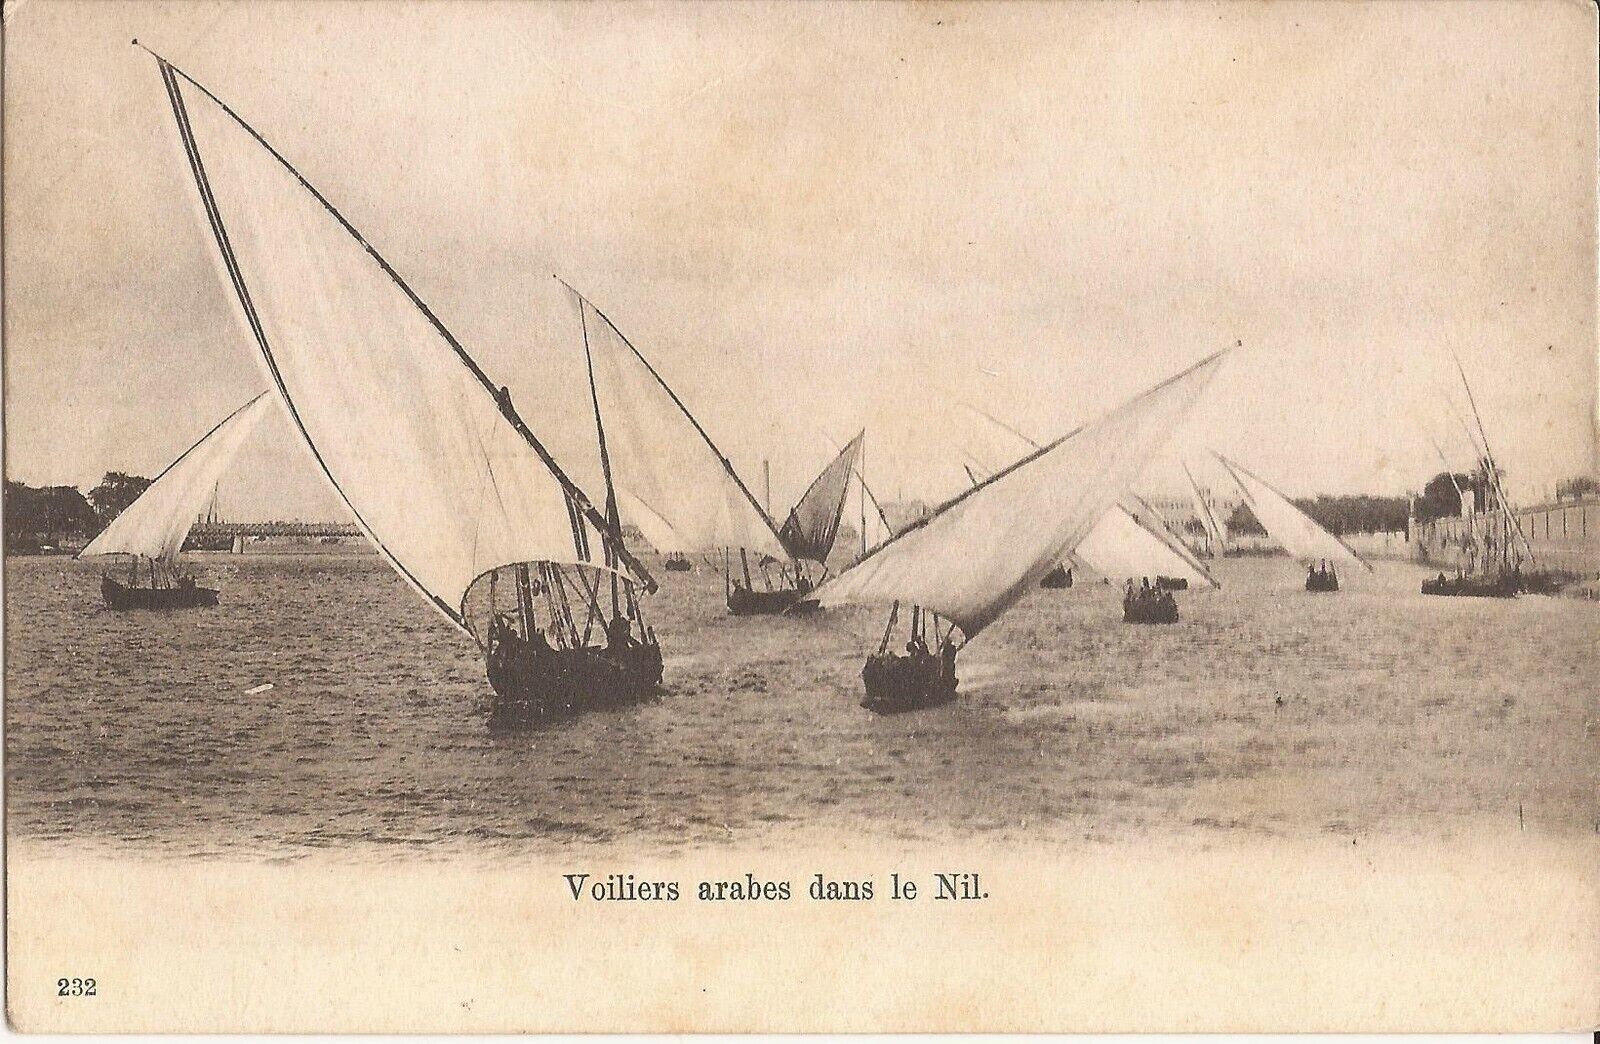 Arab Voiliers on the Nile - EGYPT - felucca